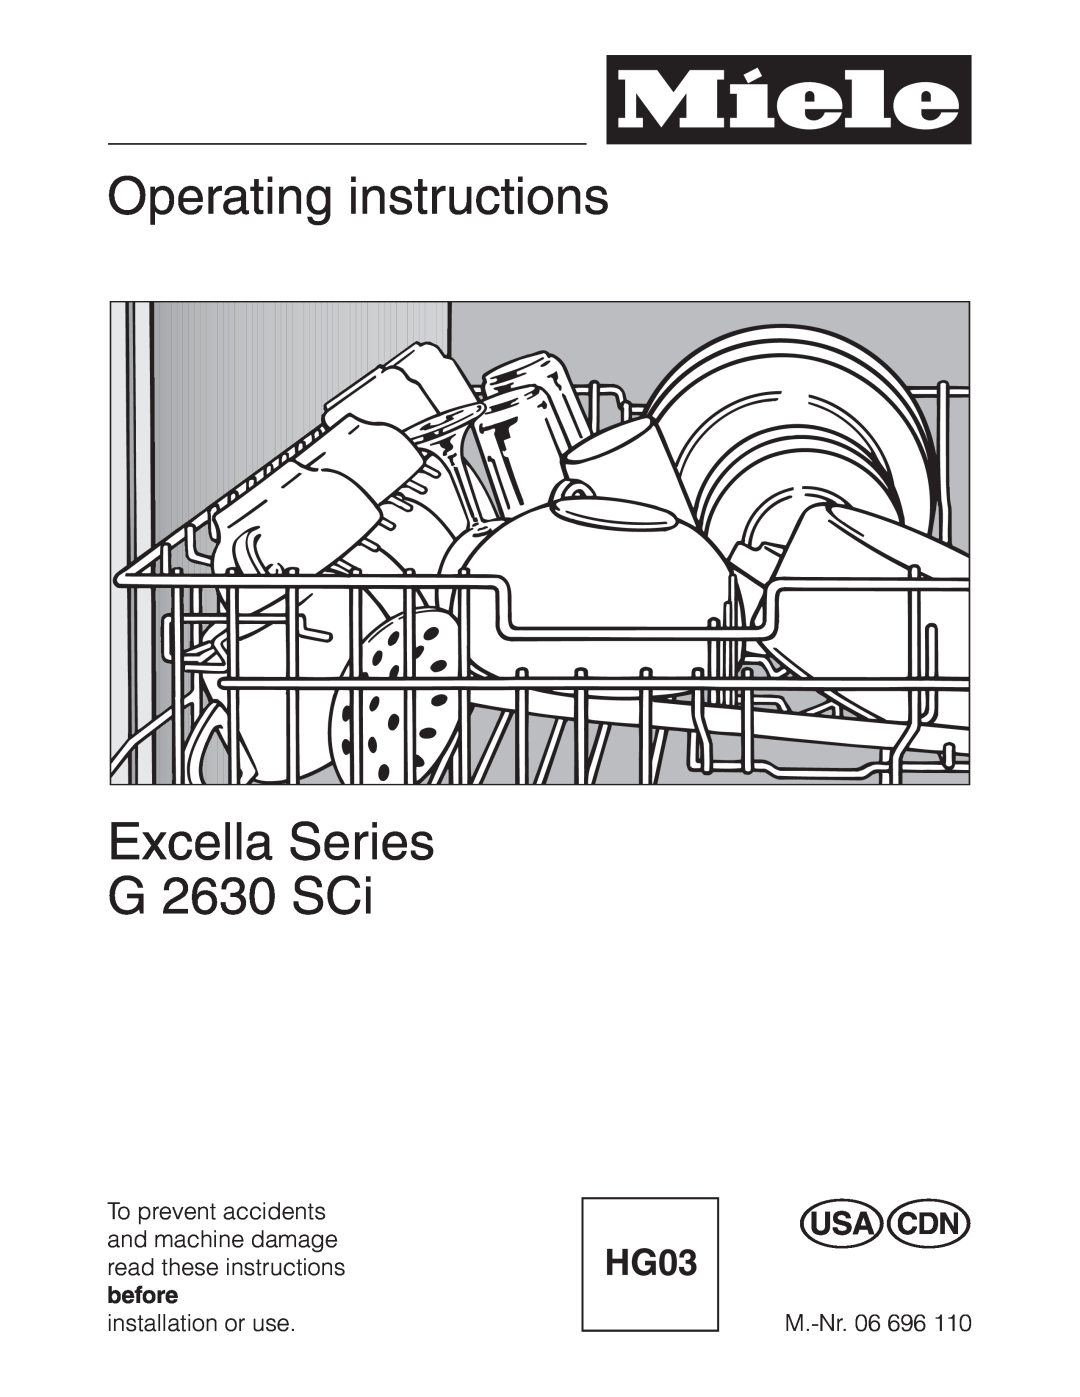 Miele G 2630 SCI operating instructions Operating instructions Excella Series G 2630 SCi 